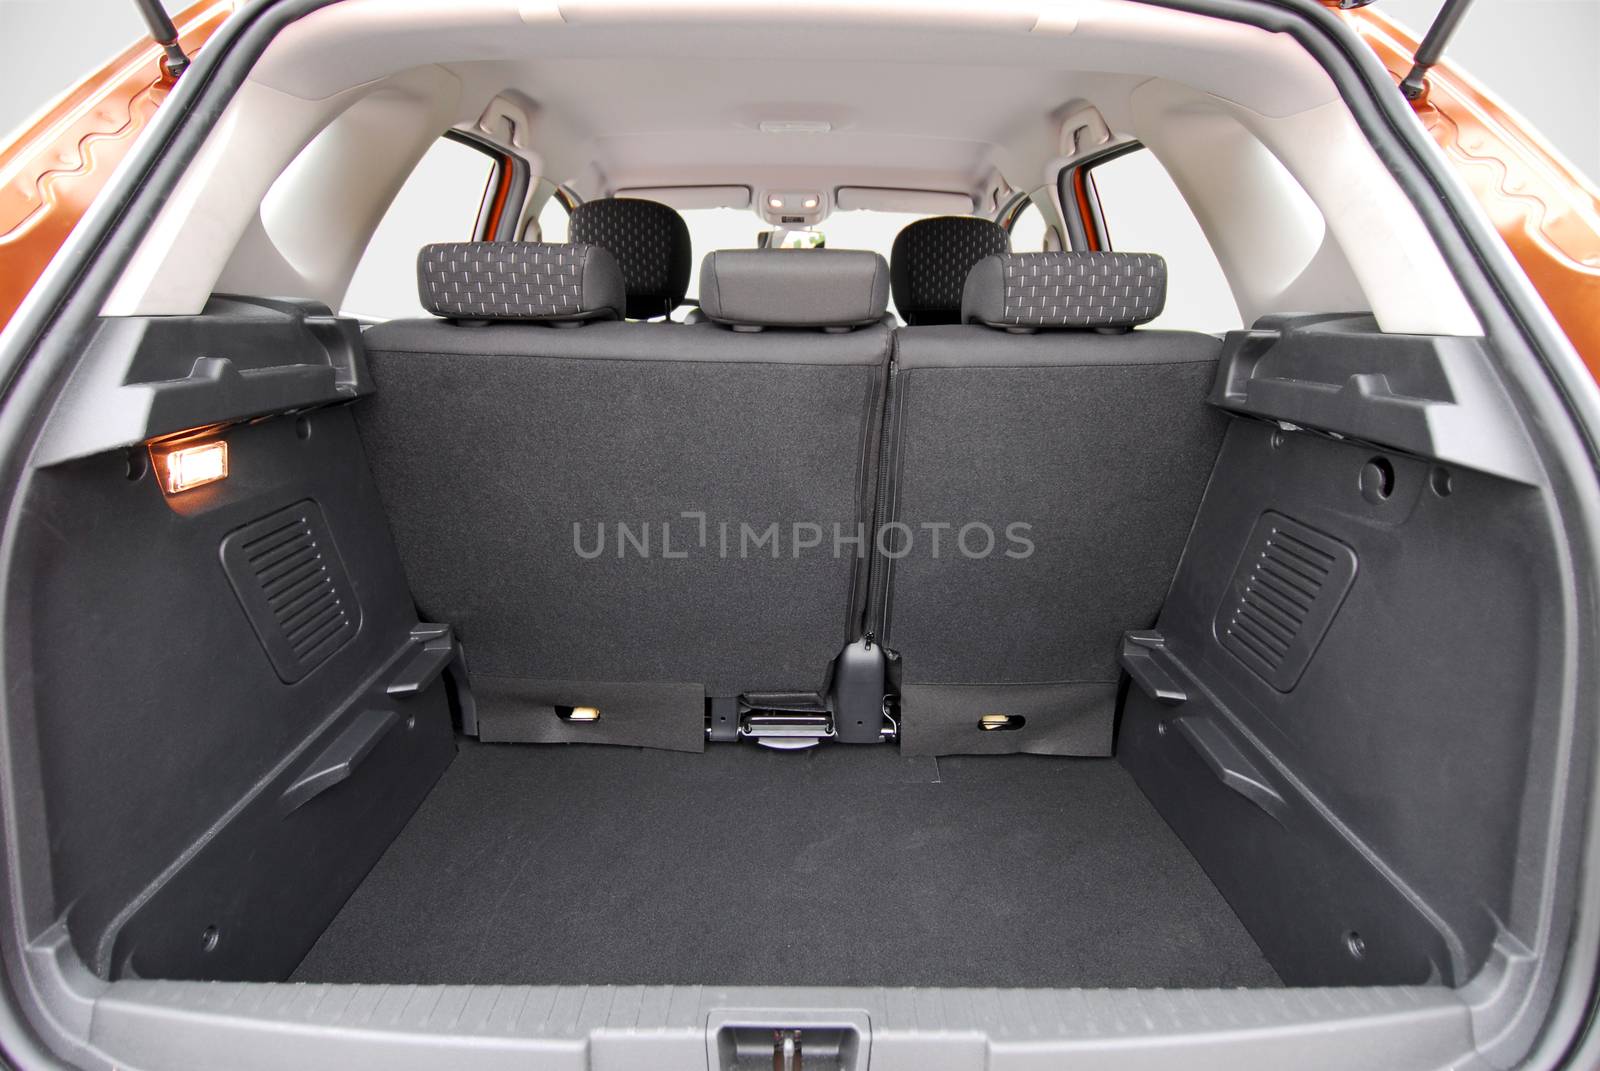 Empty trunk of the suv